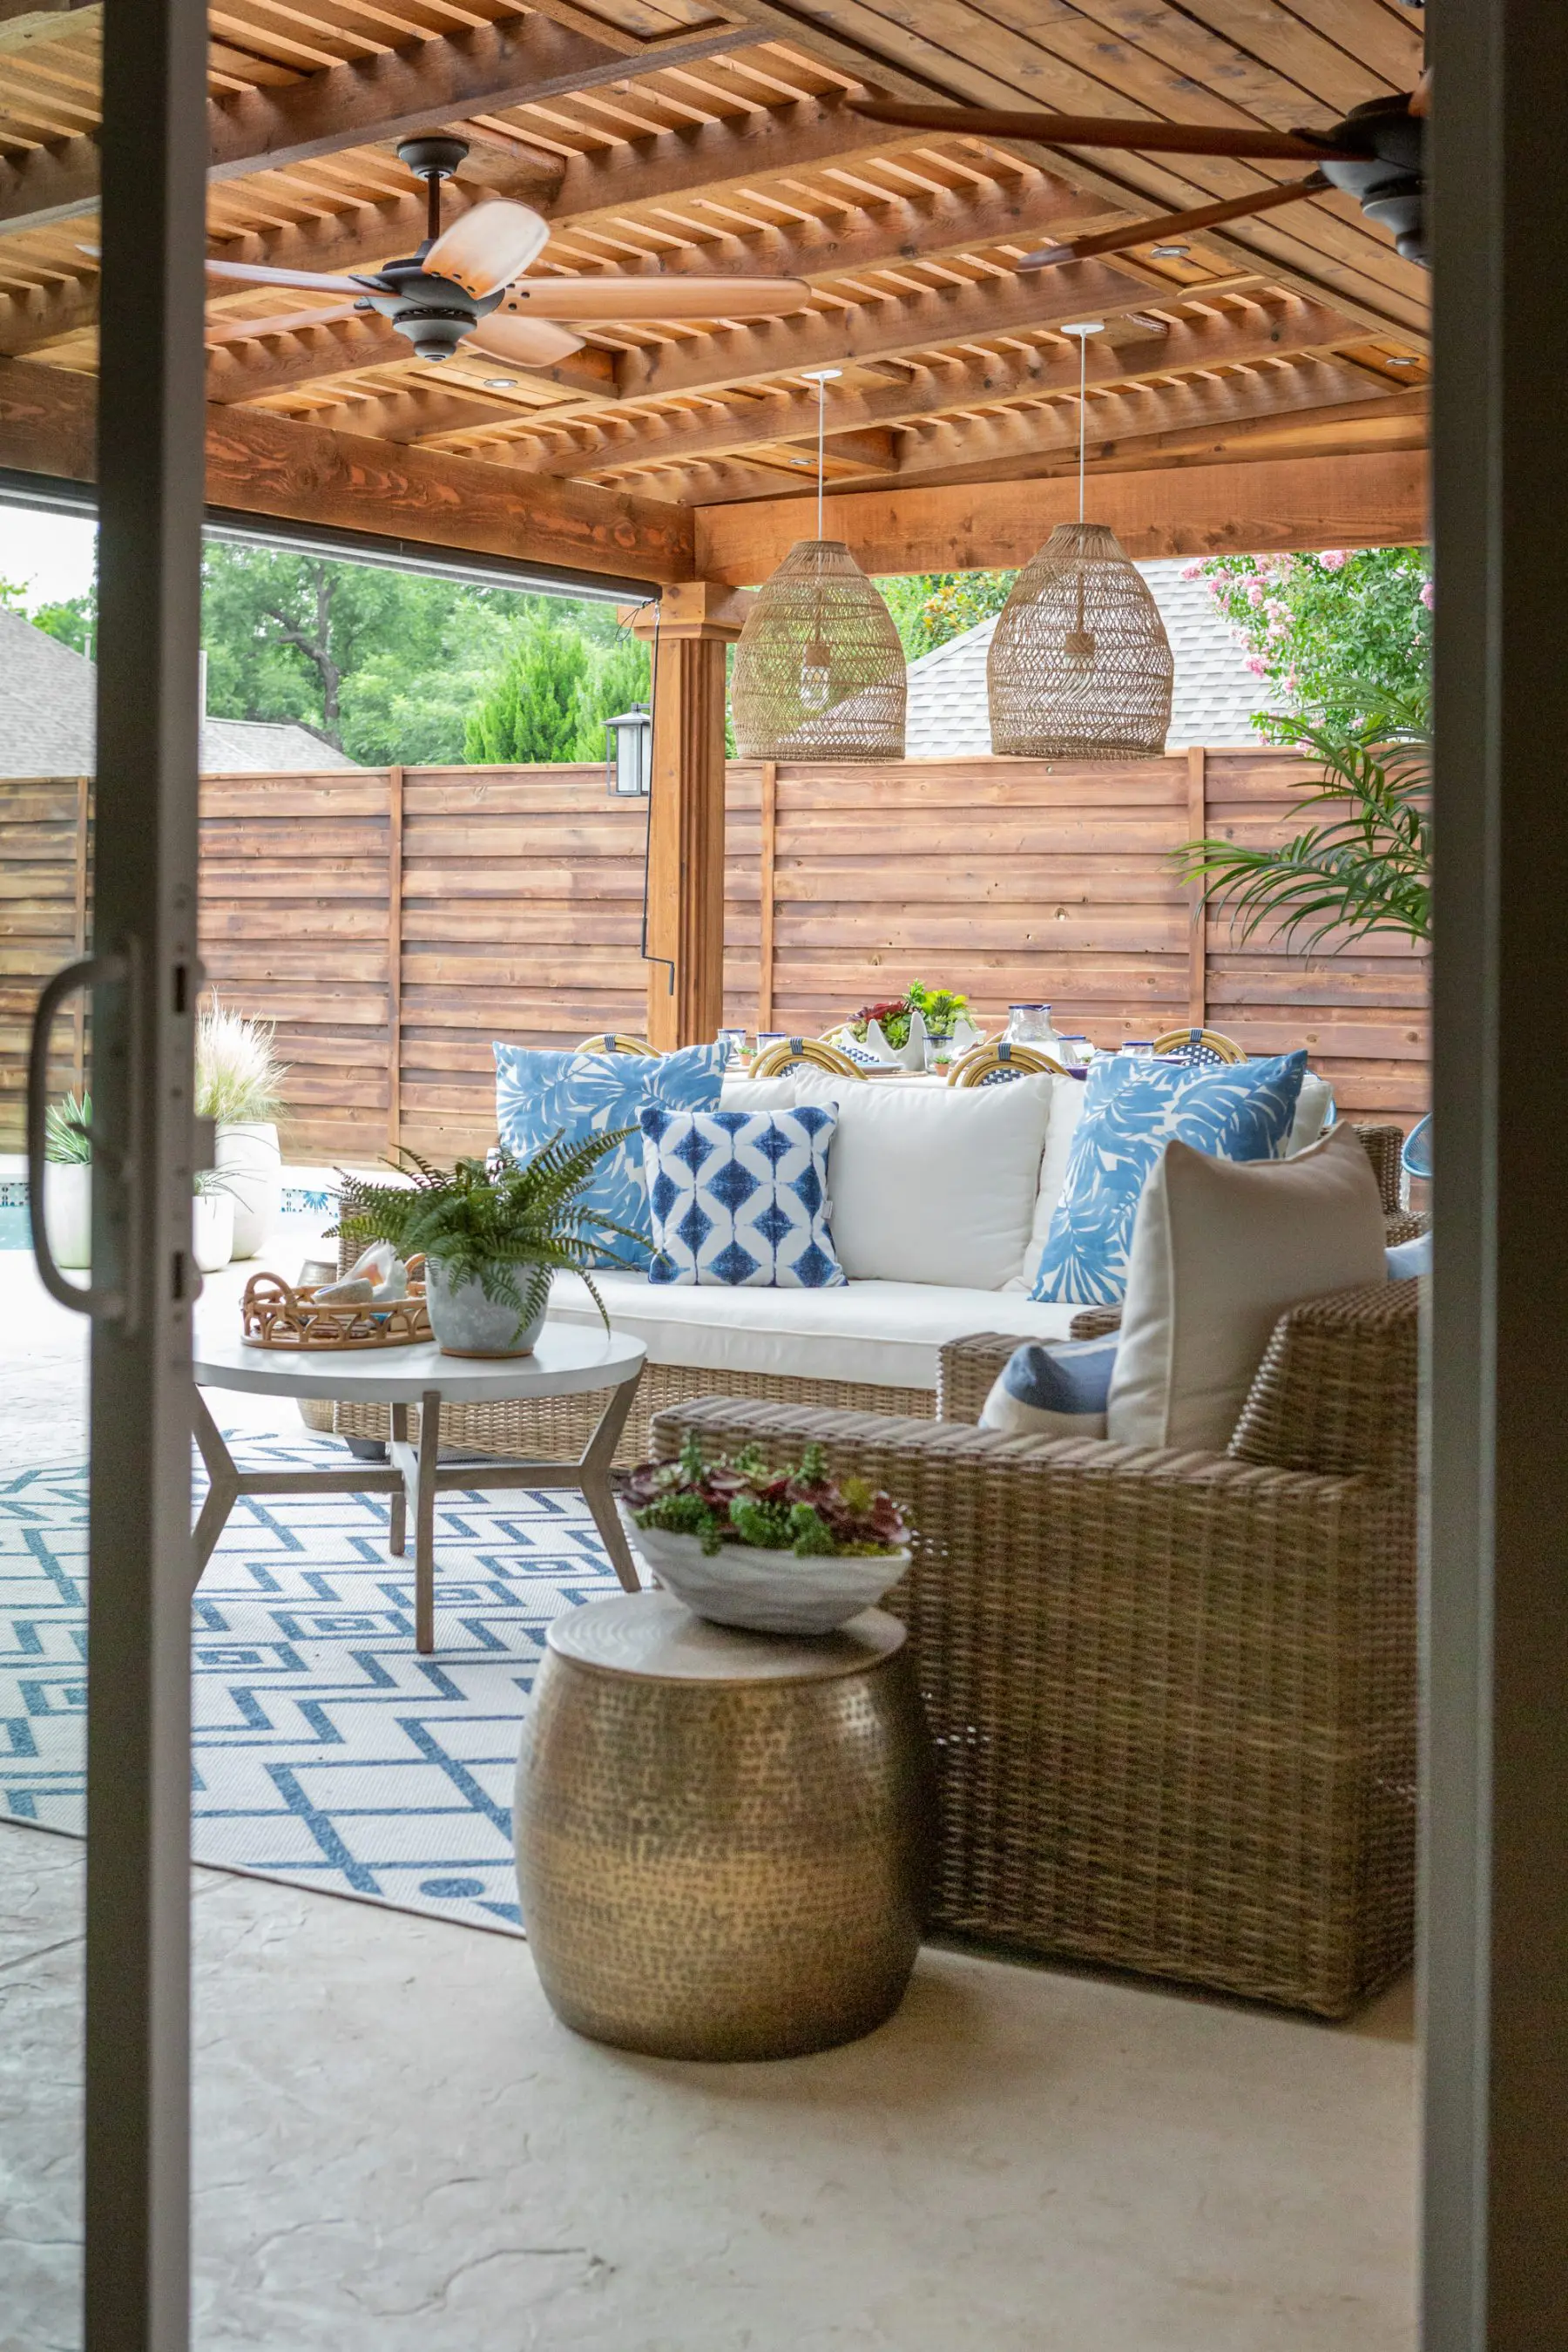 35 Creative Patio Cover Ideas for Any Budget